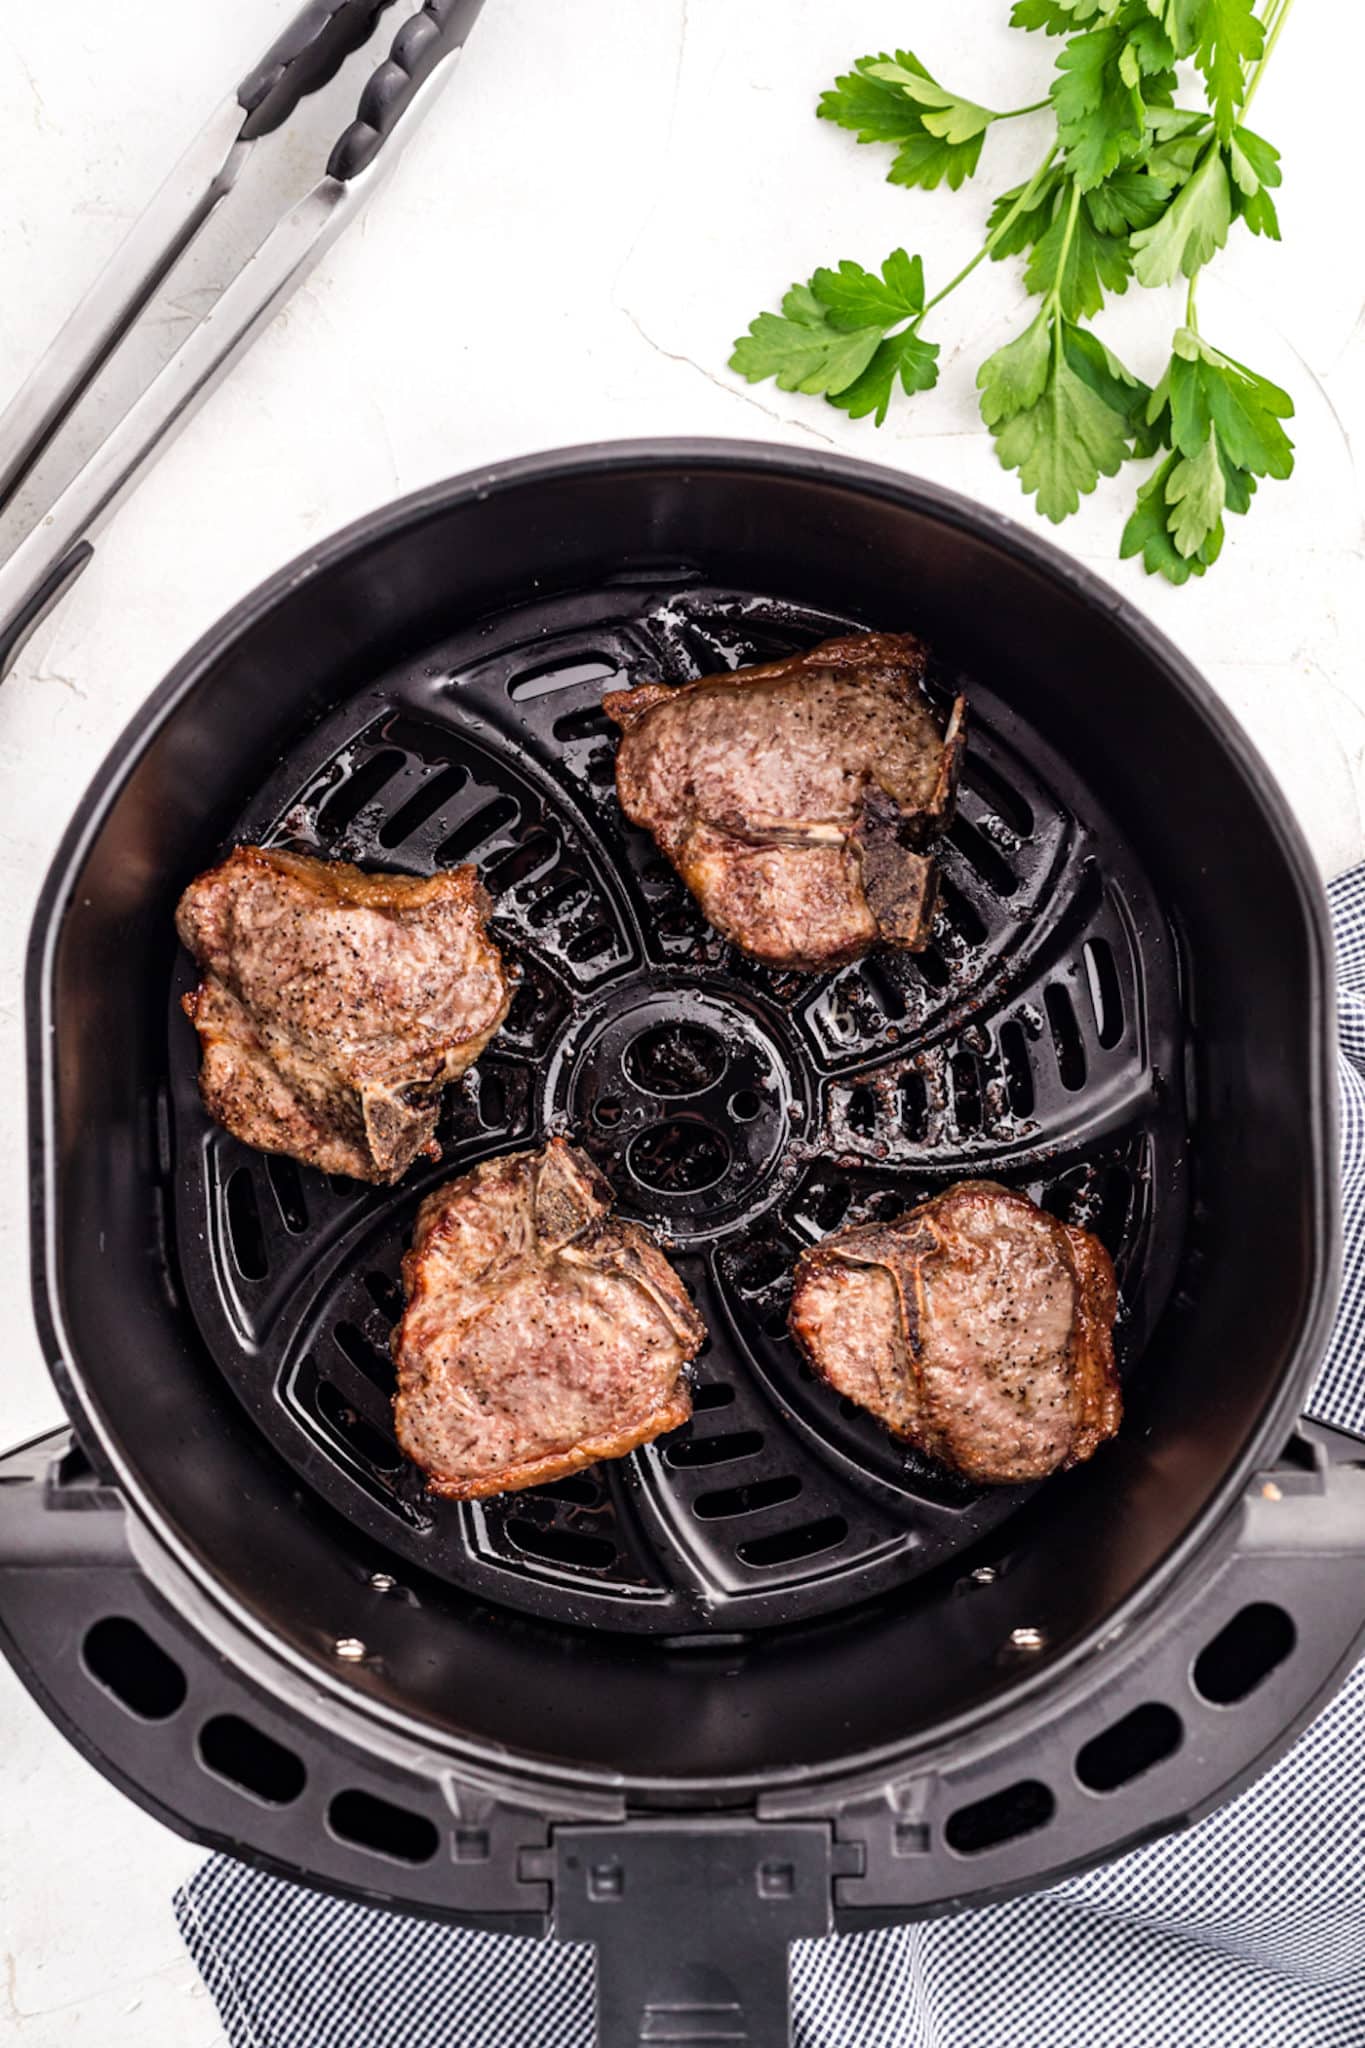 Cooked lamb chops in the basket of an air fryer.